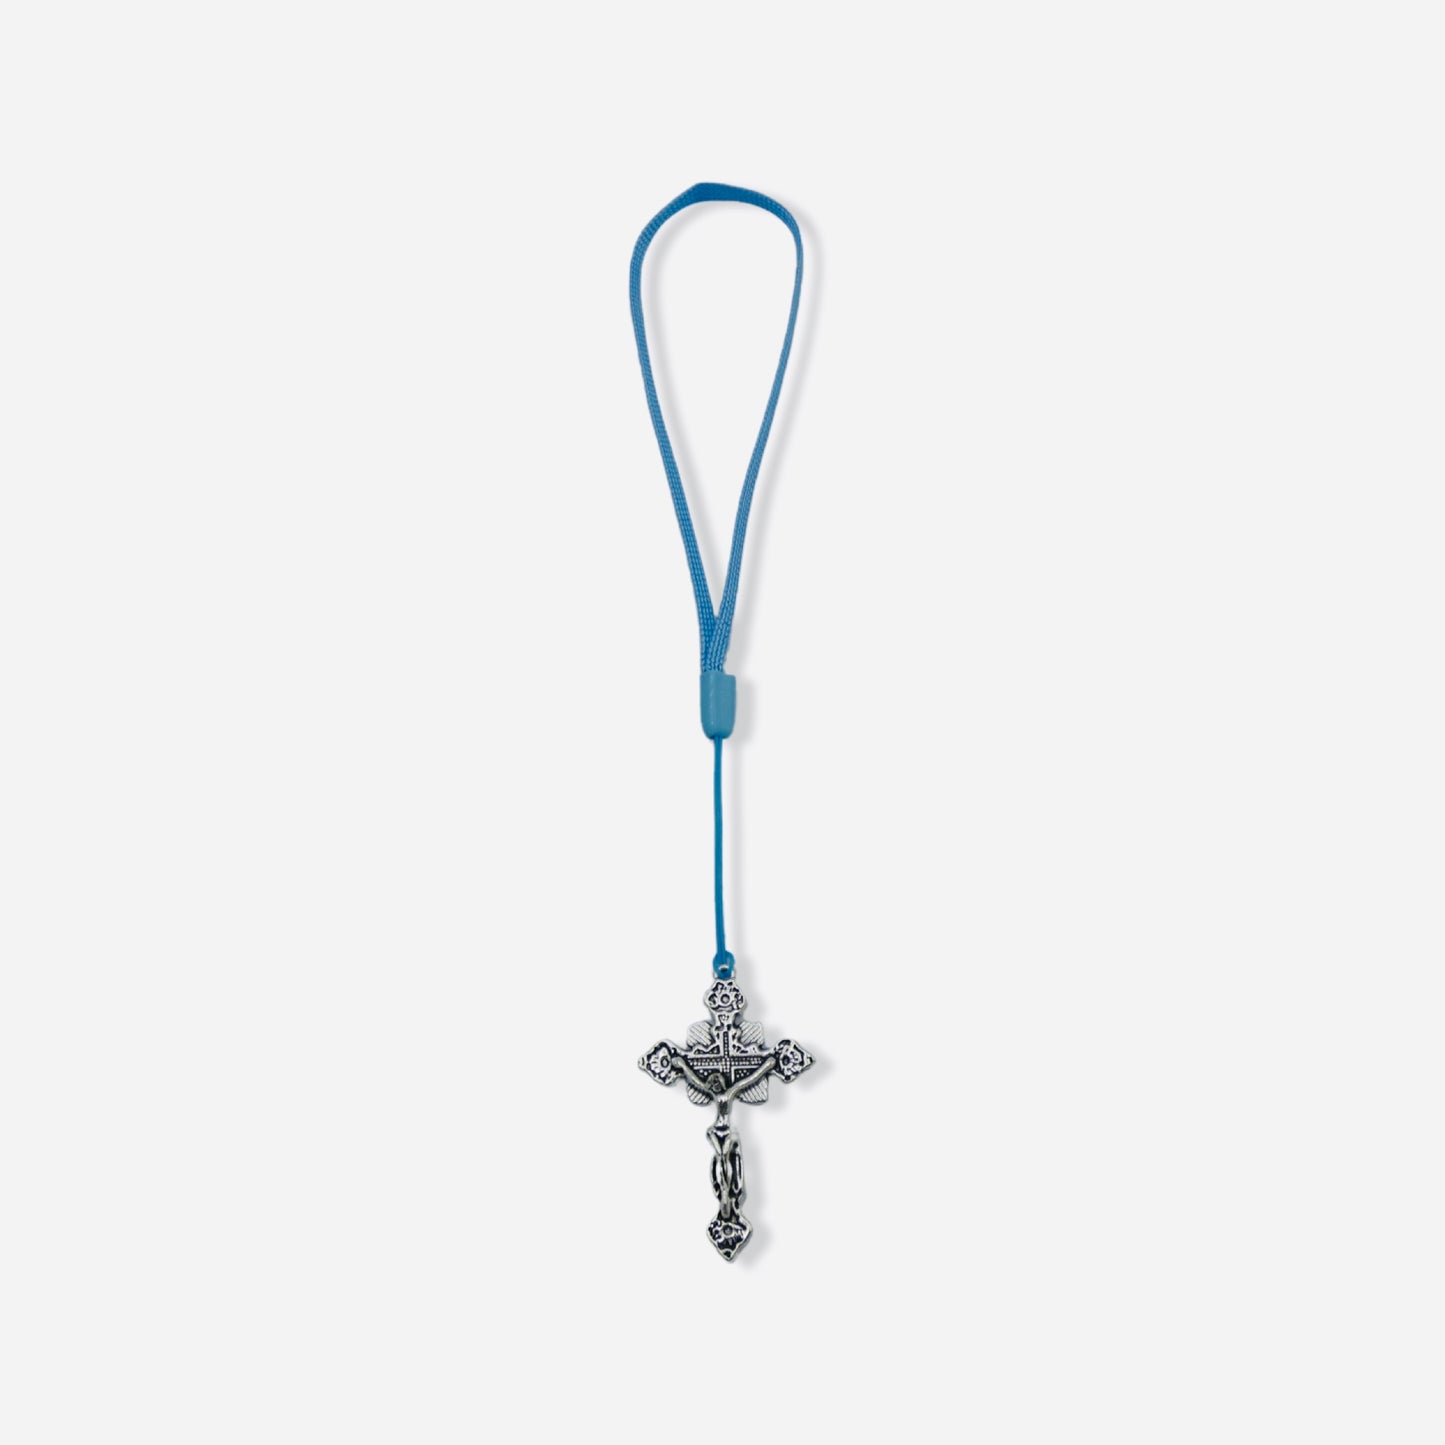 Lanyard with Crucifix of Assorted Colors and Styles